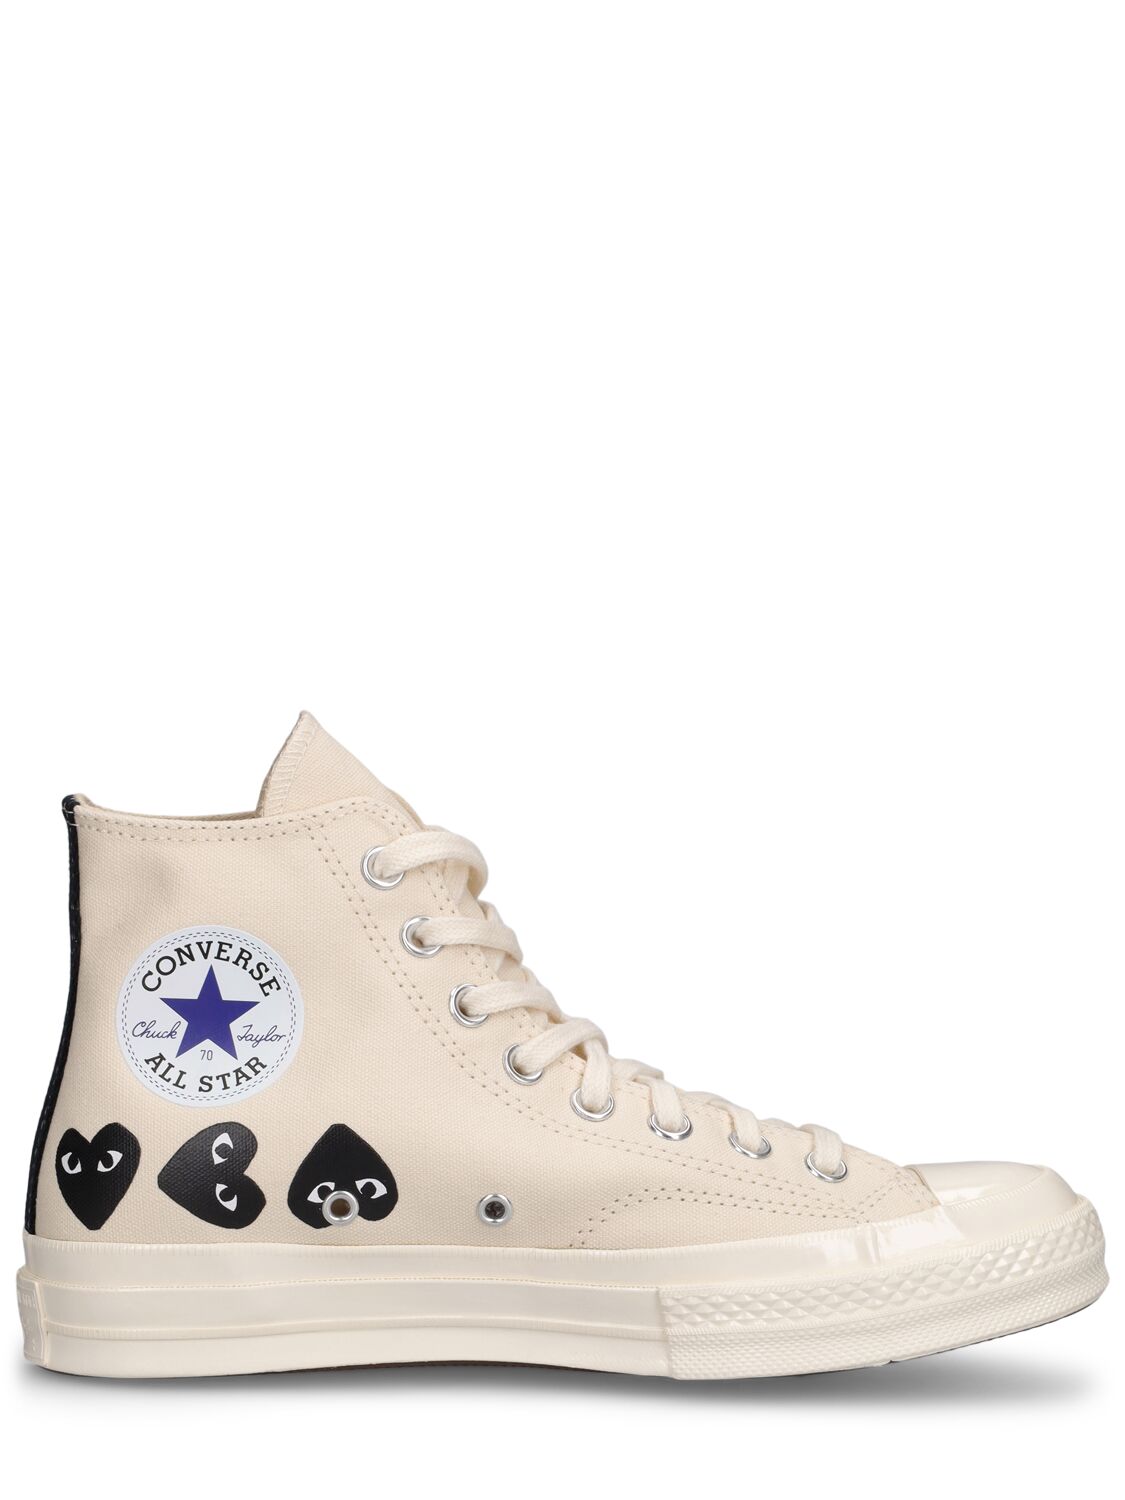 Comme Des Garçons Play Converse Canvas High Top Sneakers In White